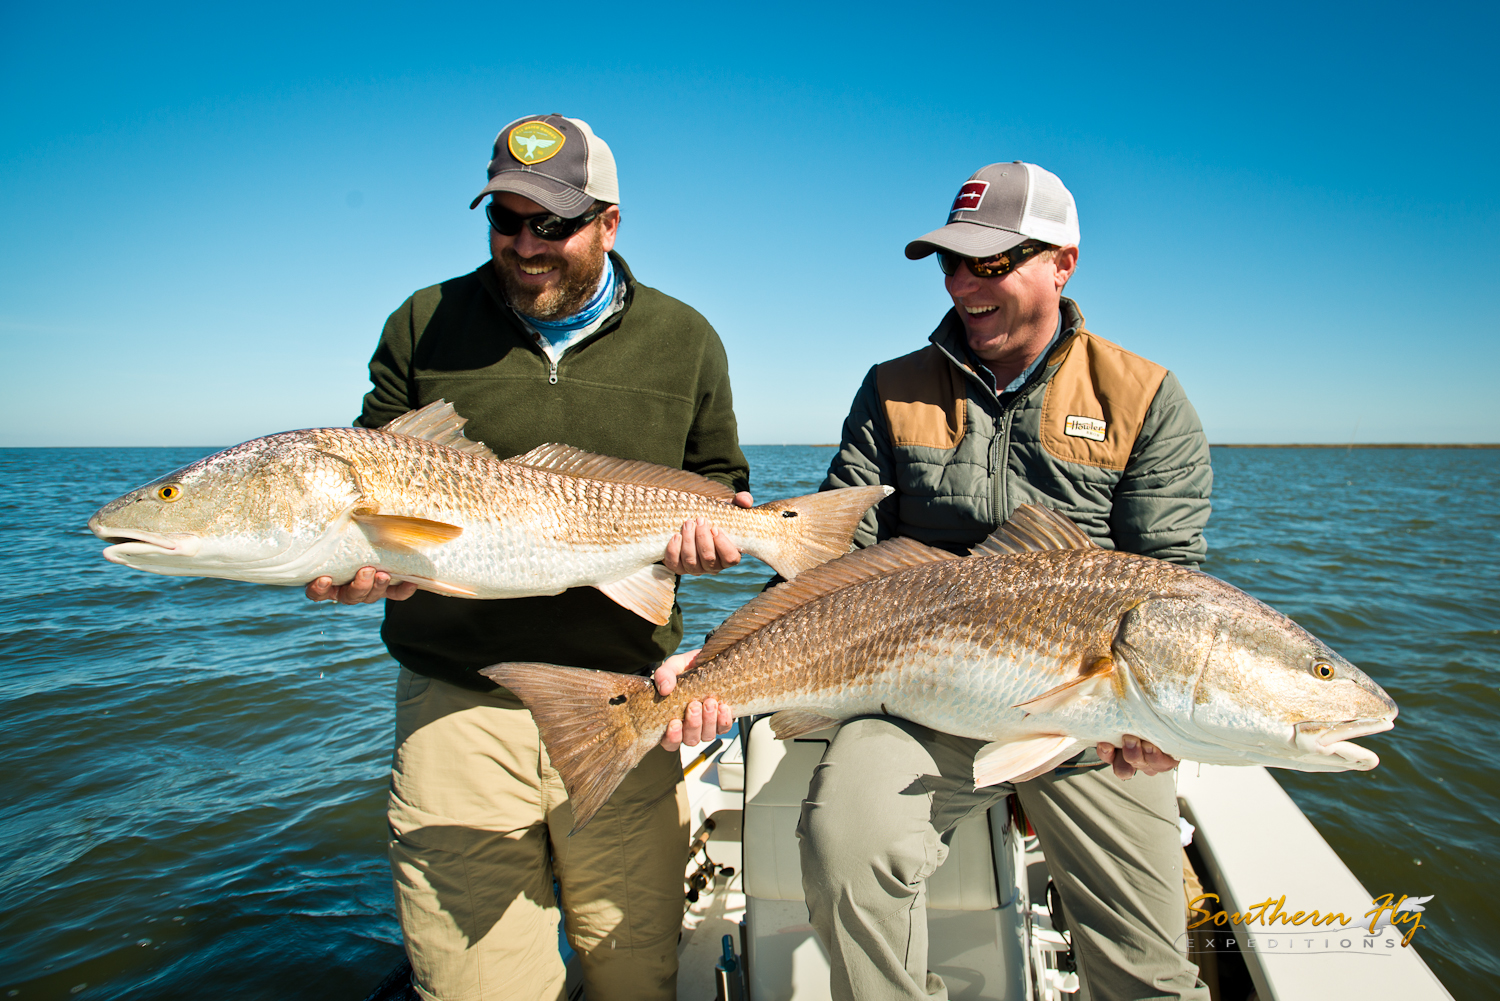 Southern Fly Expeditions — When Is The Best Time To Fly Fish in Louisiana -  New Orleans - Louisiana Fly fishing Guide New Orleans, Louisiana